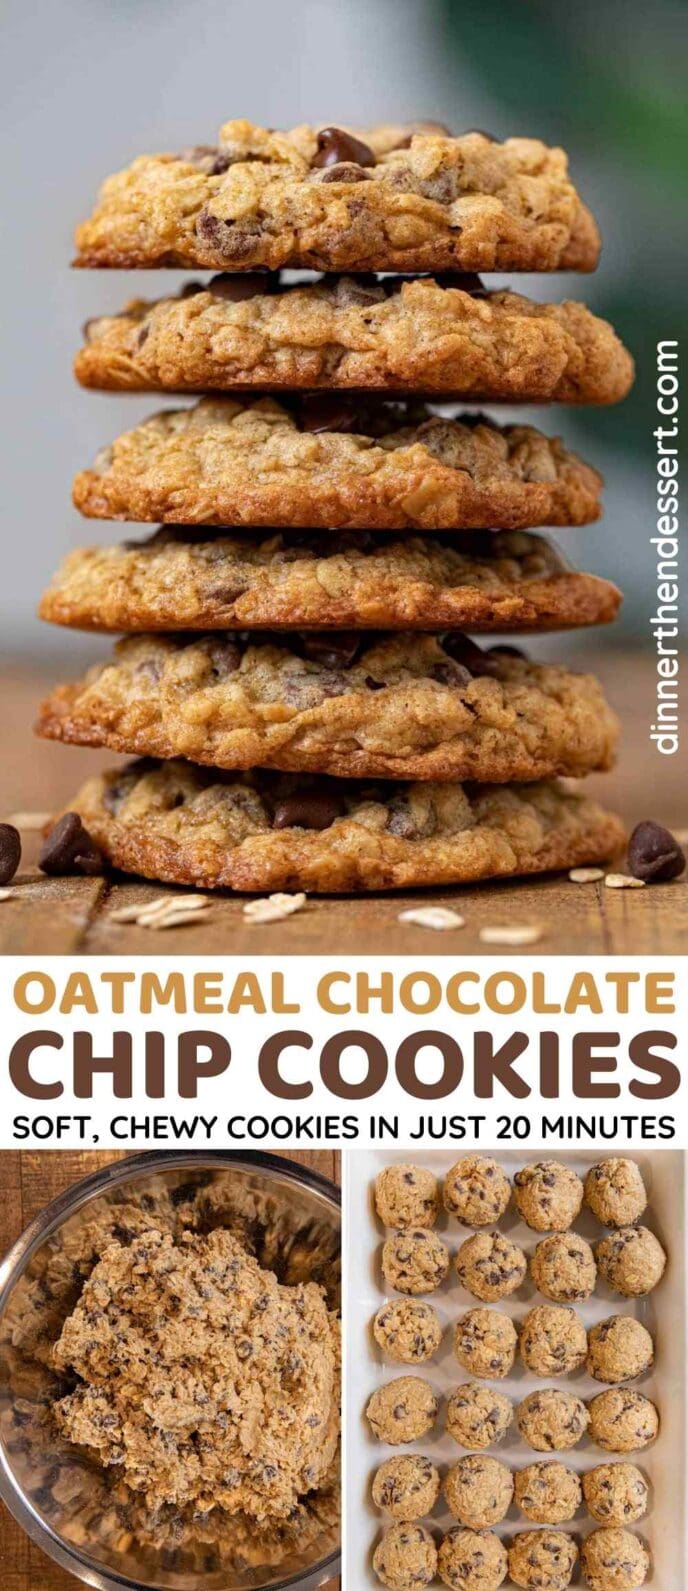 Oatmeal Chocolate Chip Cookies Collage